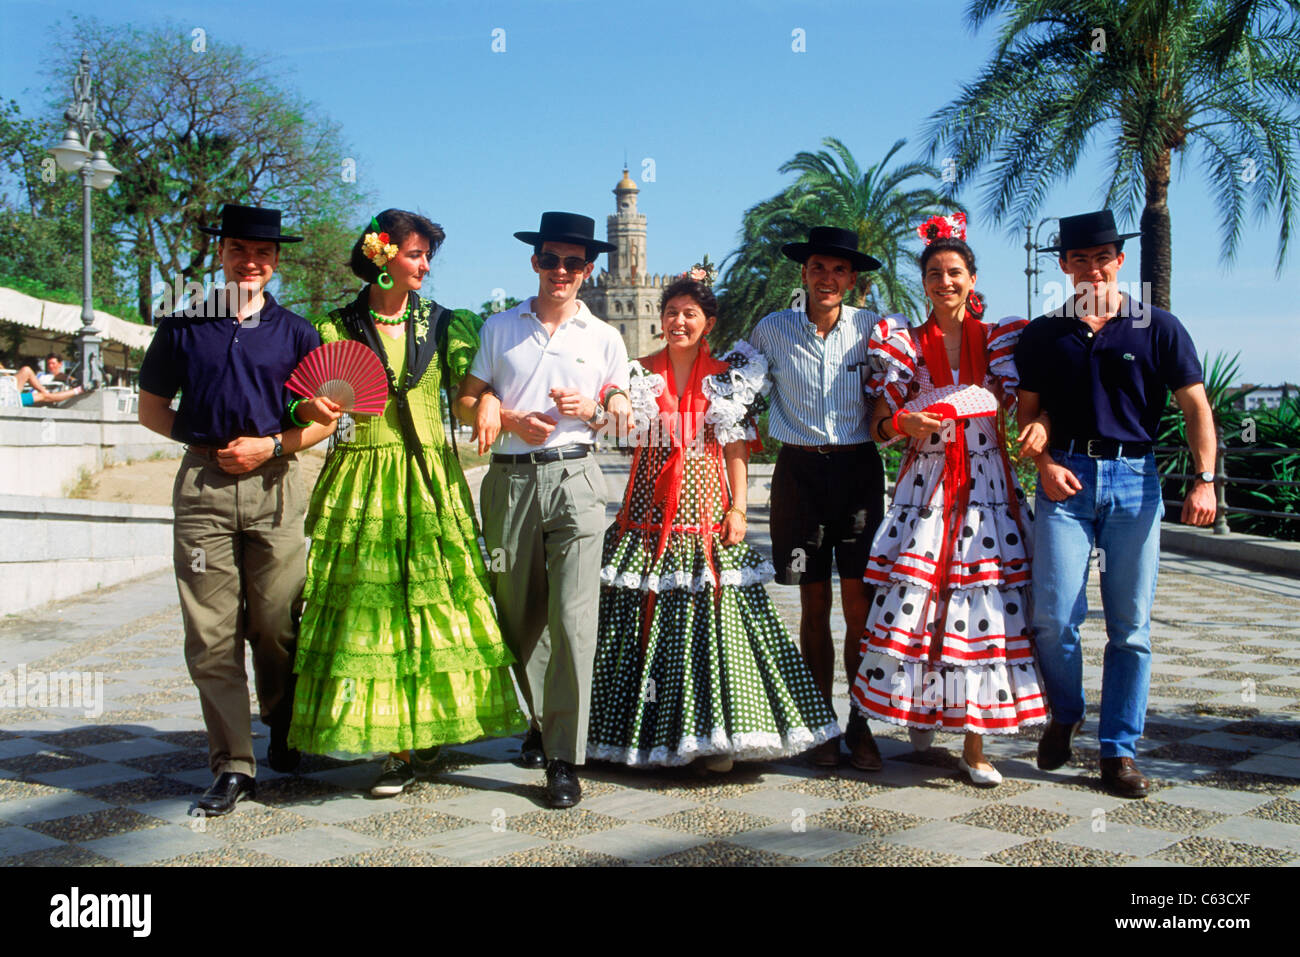 Young men and women with traditional colorful costumes during "Feria De  Sevilla" festival in Seville (Sevilla), Spain Stock Photo - Alamy